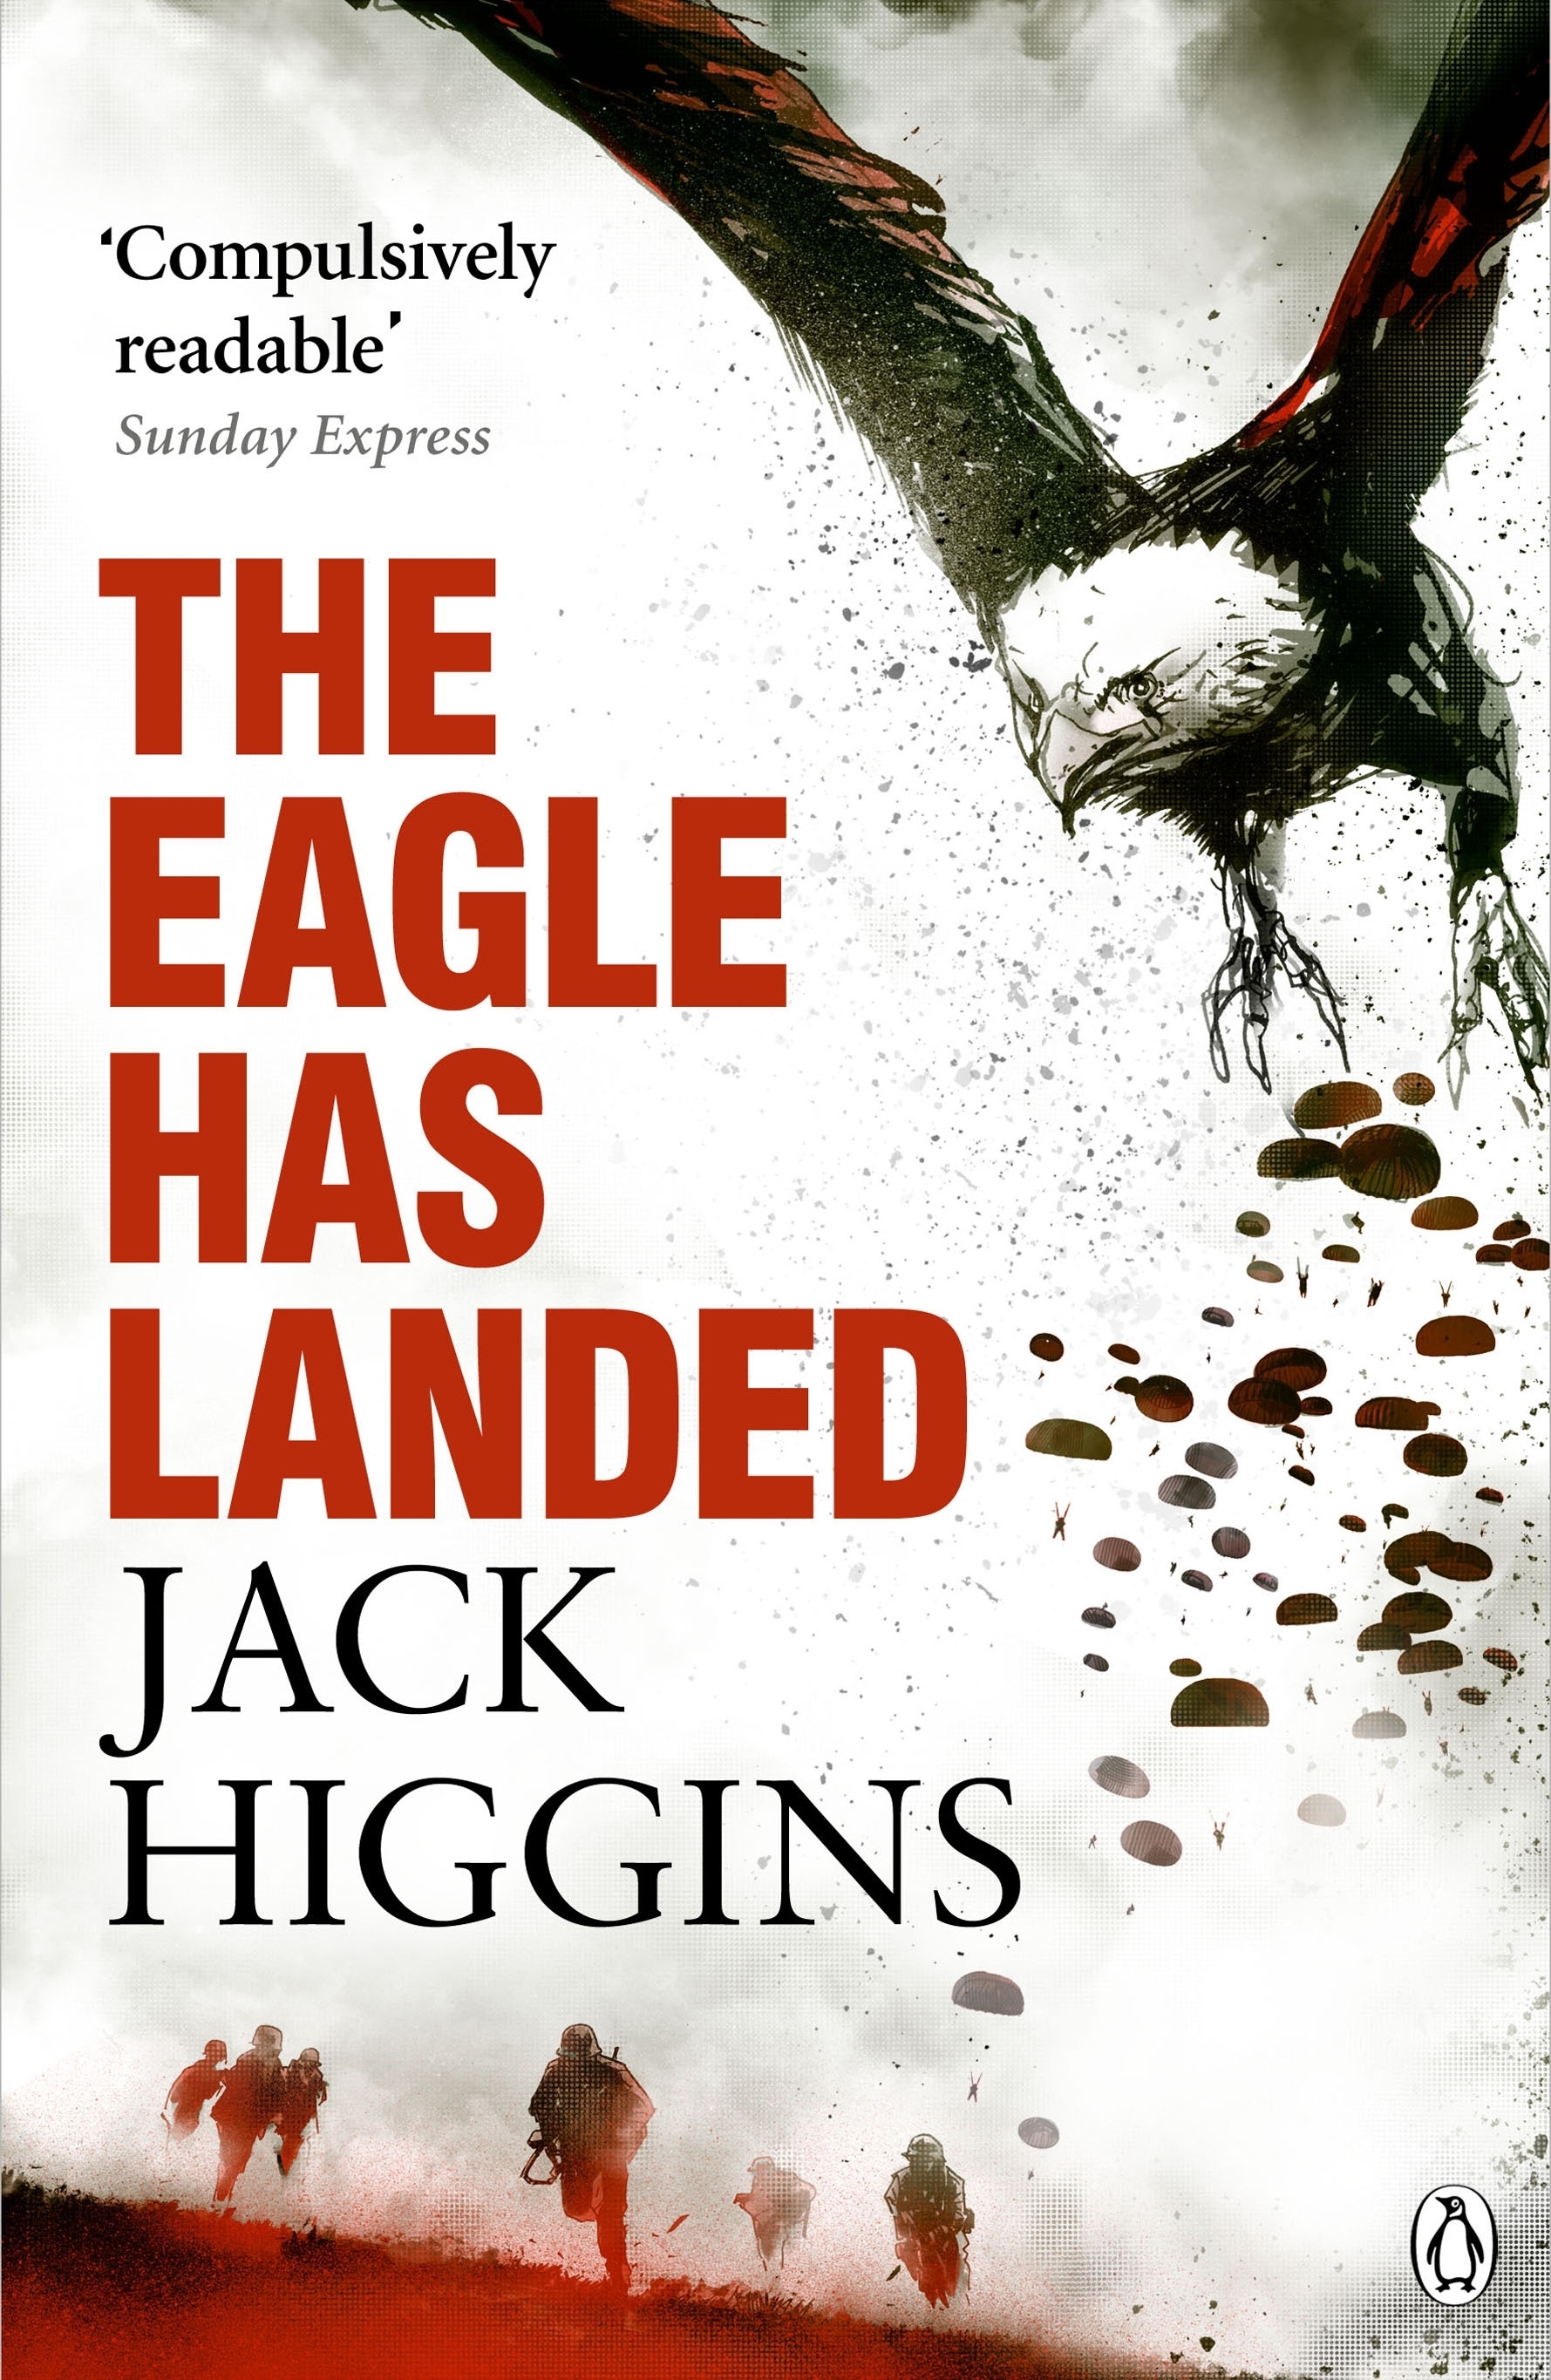 Image for "The Eagle Has Landed"